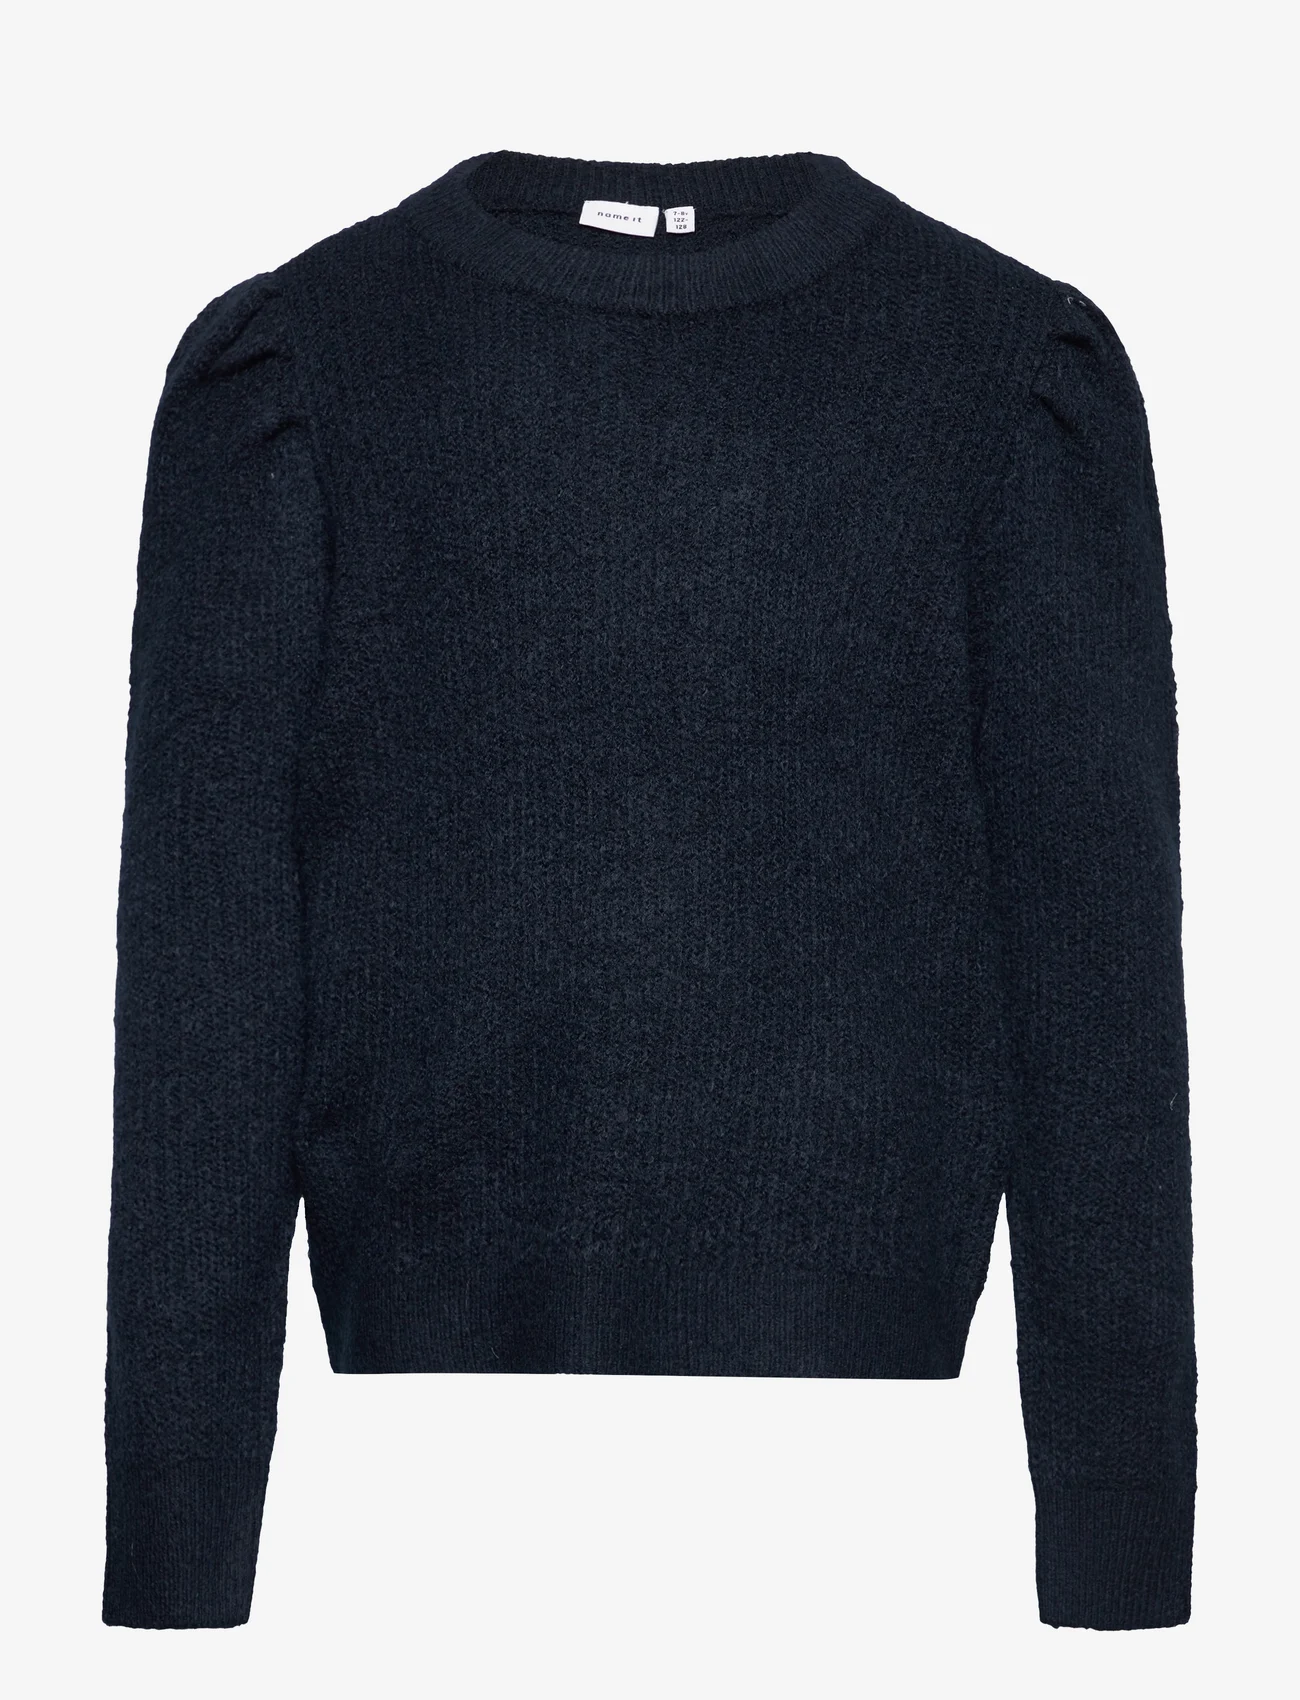 name it - NKFRHIS LS  KNIT CAMP - pullover - dark sapphire - 0